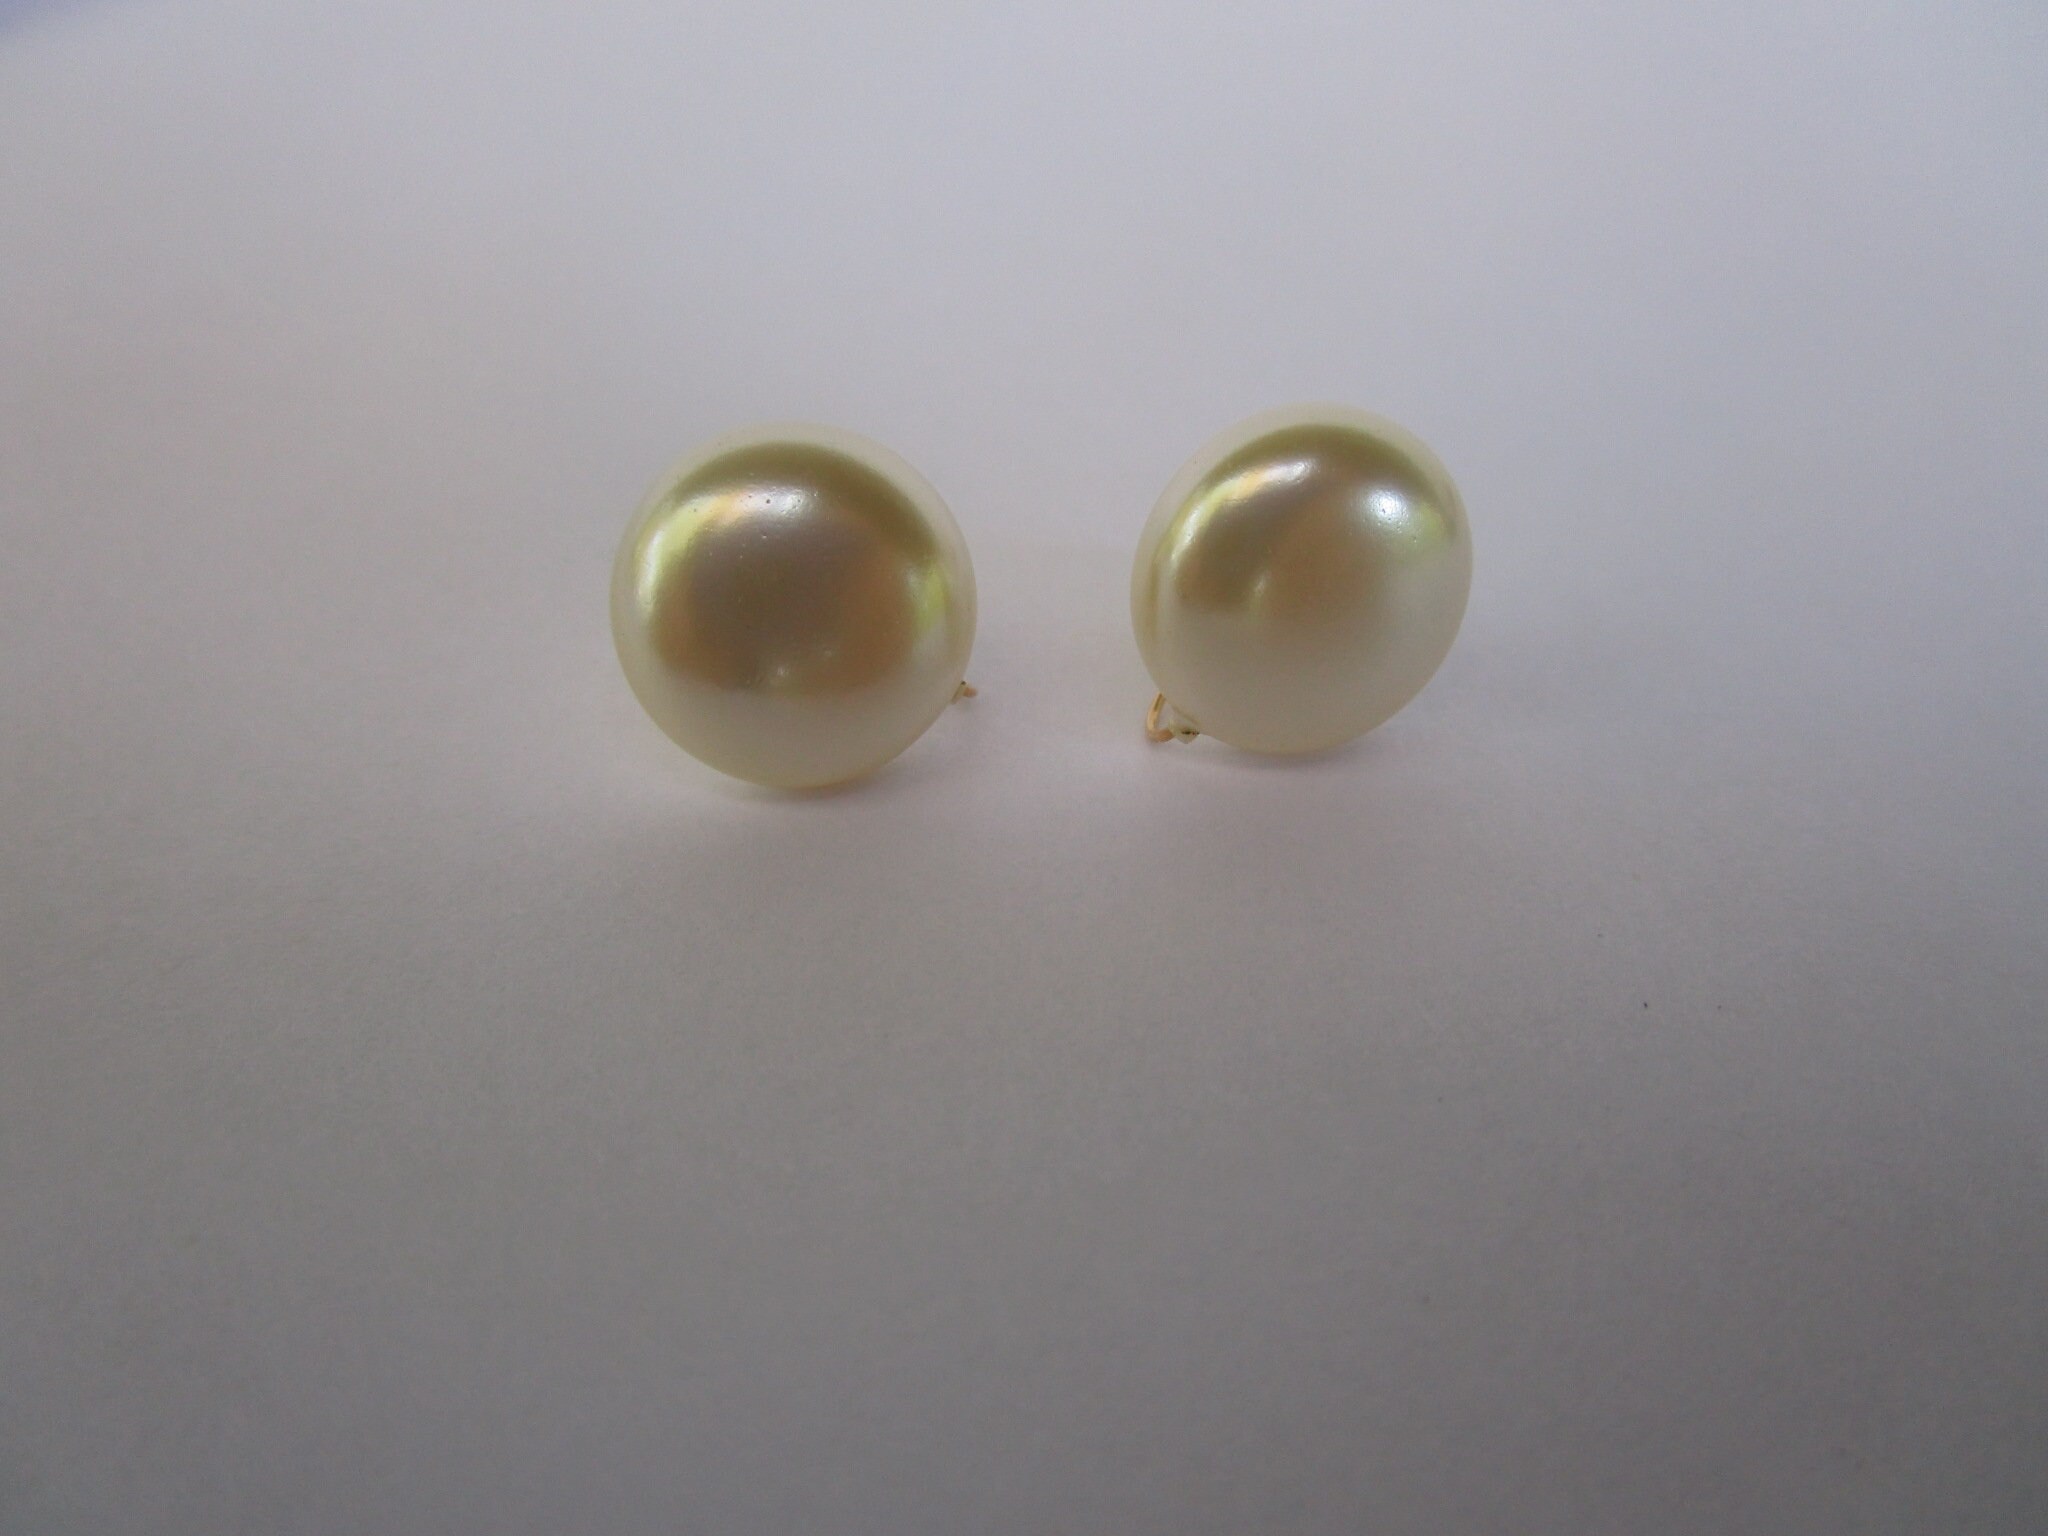 Reversible No-Poke Solid 14K Gold and Pearl Studs